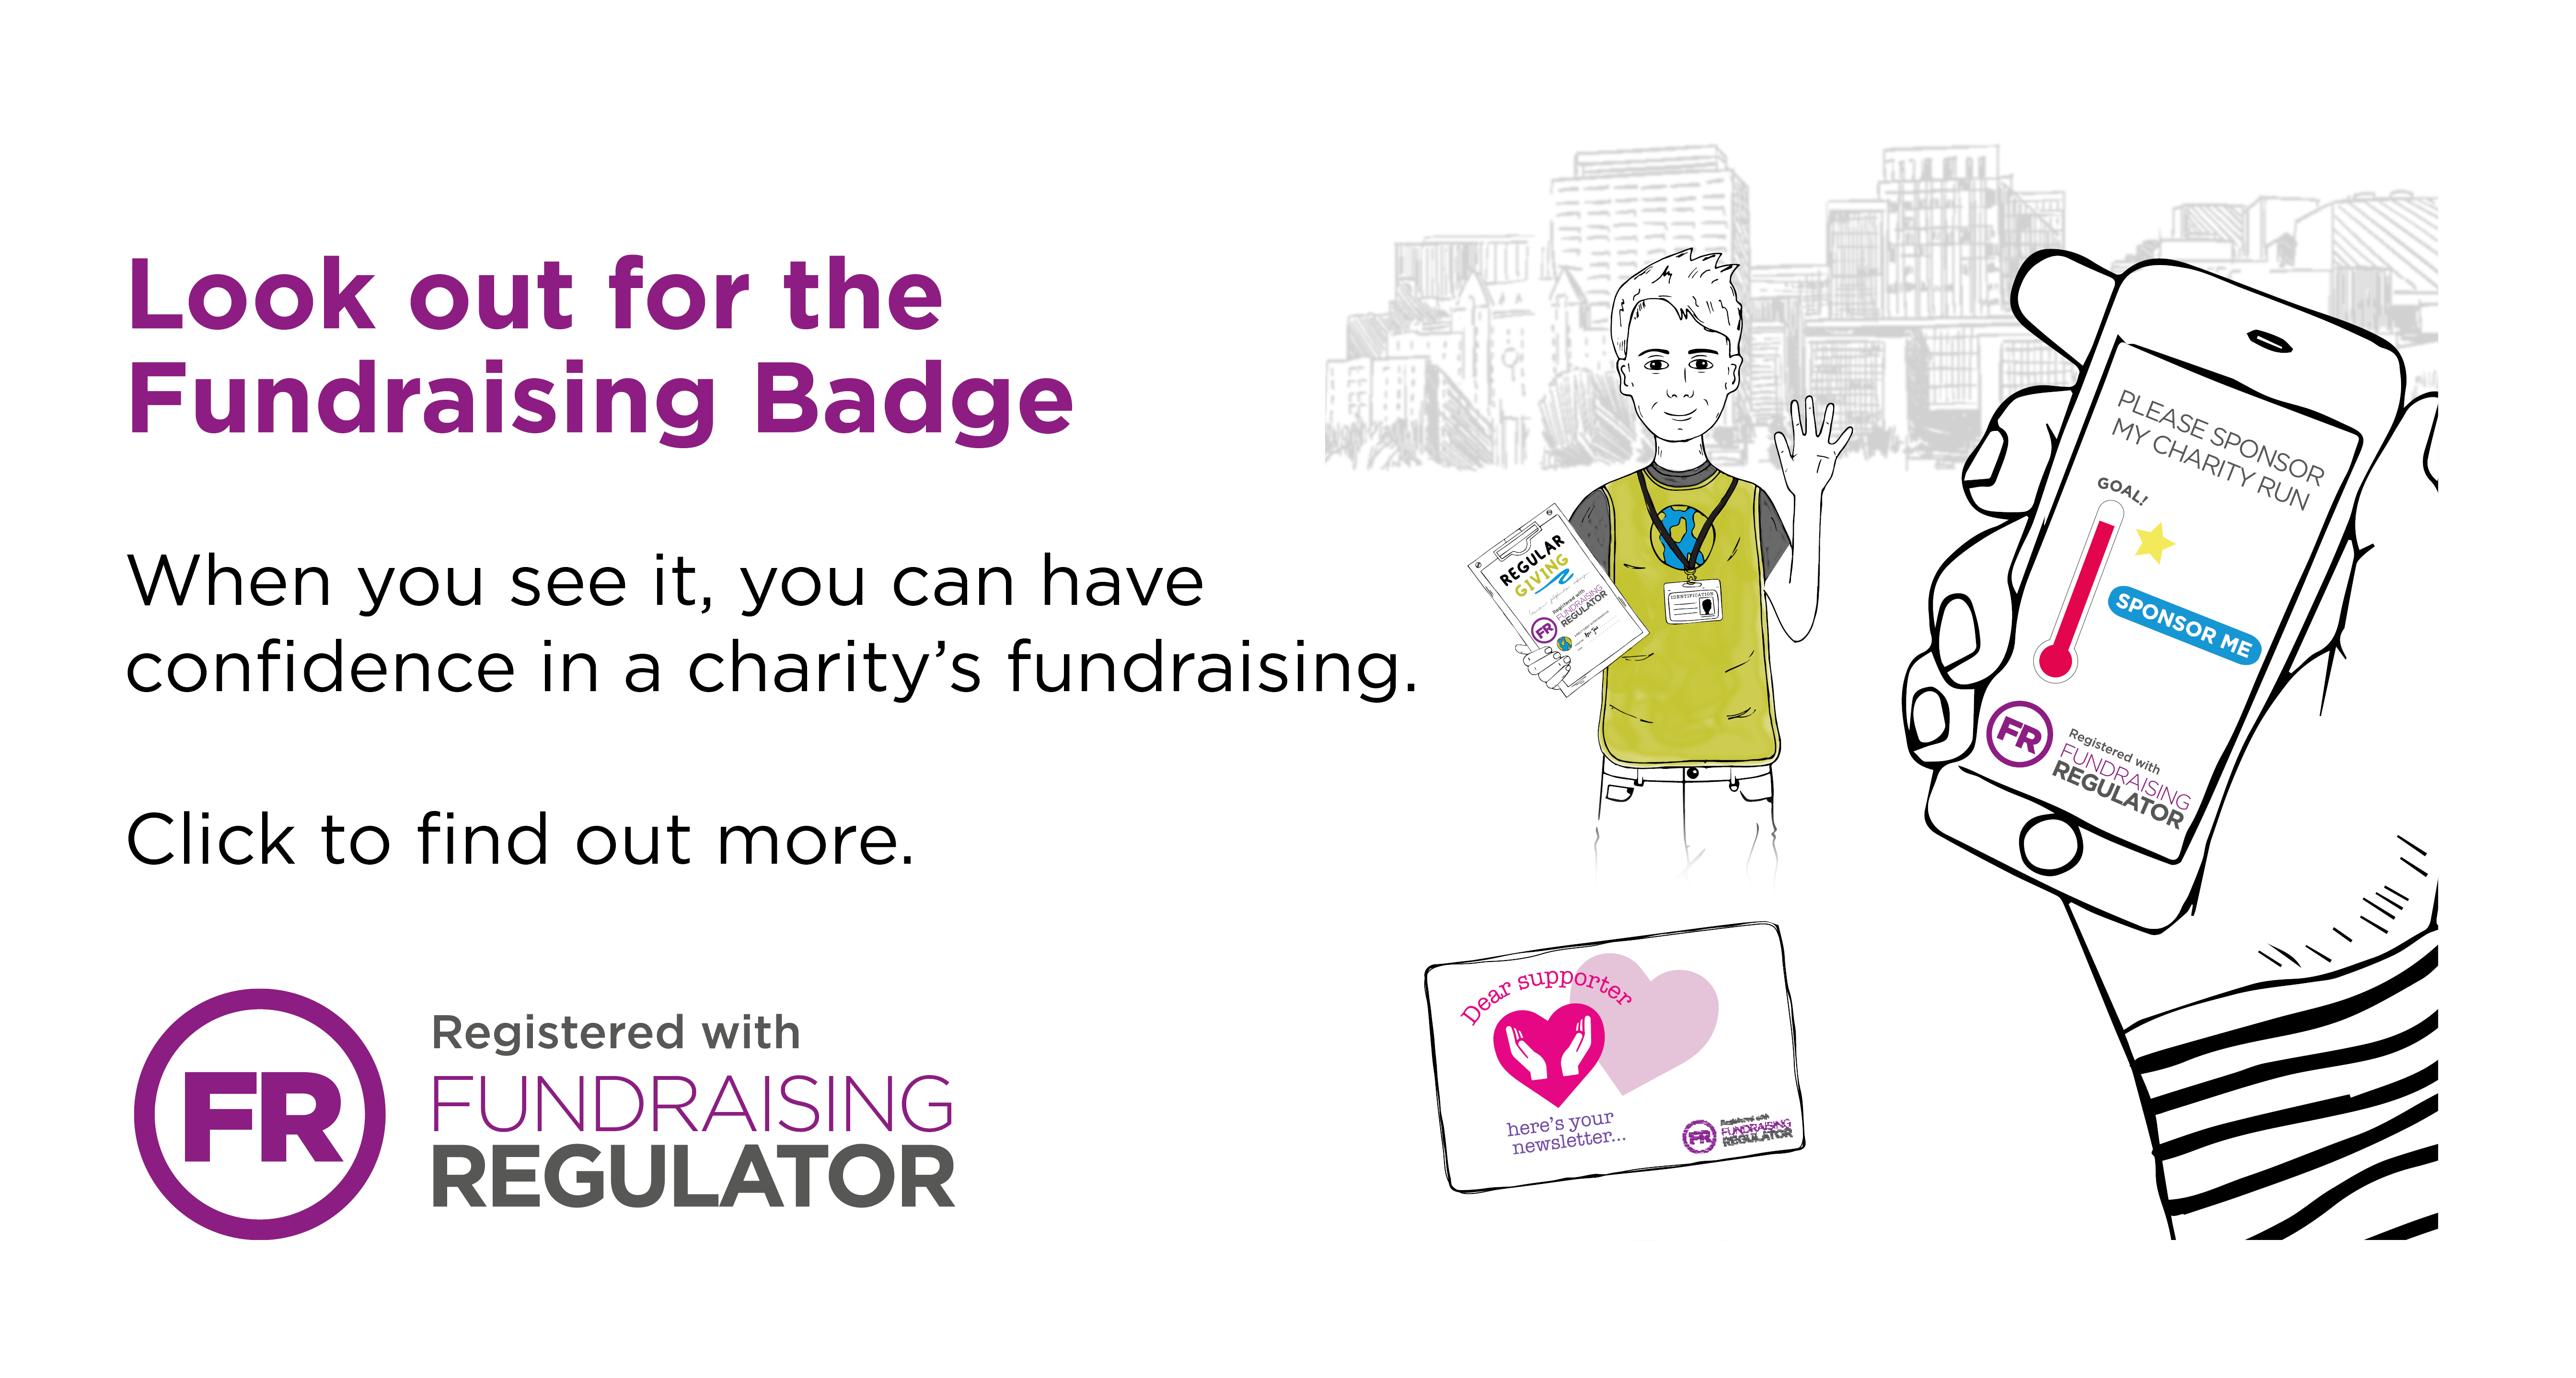 Look out for the Fundraising Badge. When you see it, you can have confidence in a charity’s fundraising. Click to find out more.